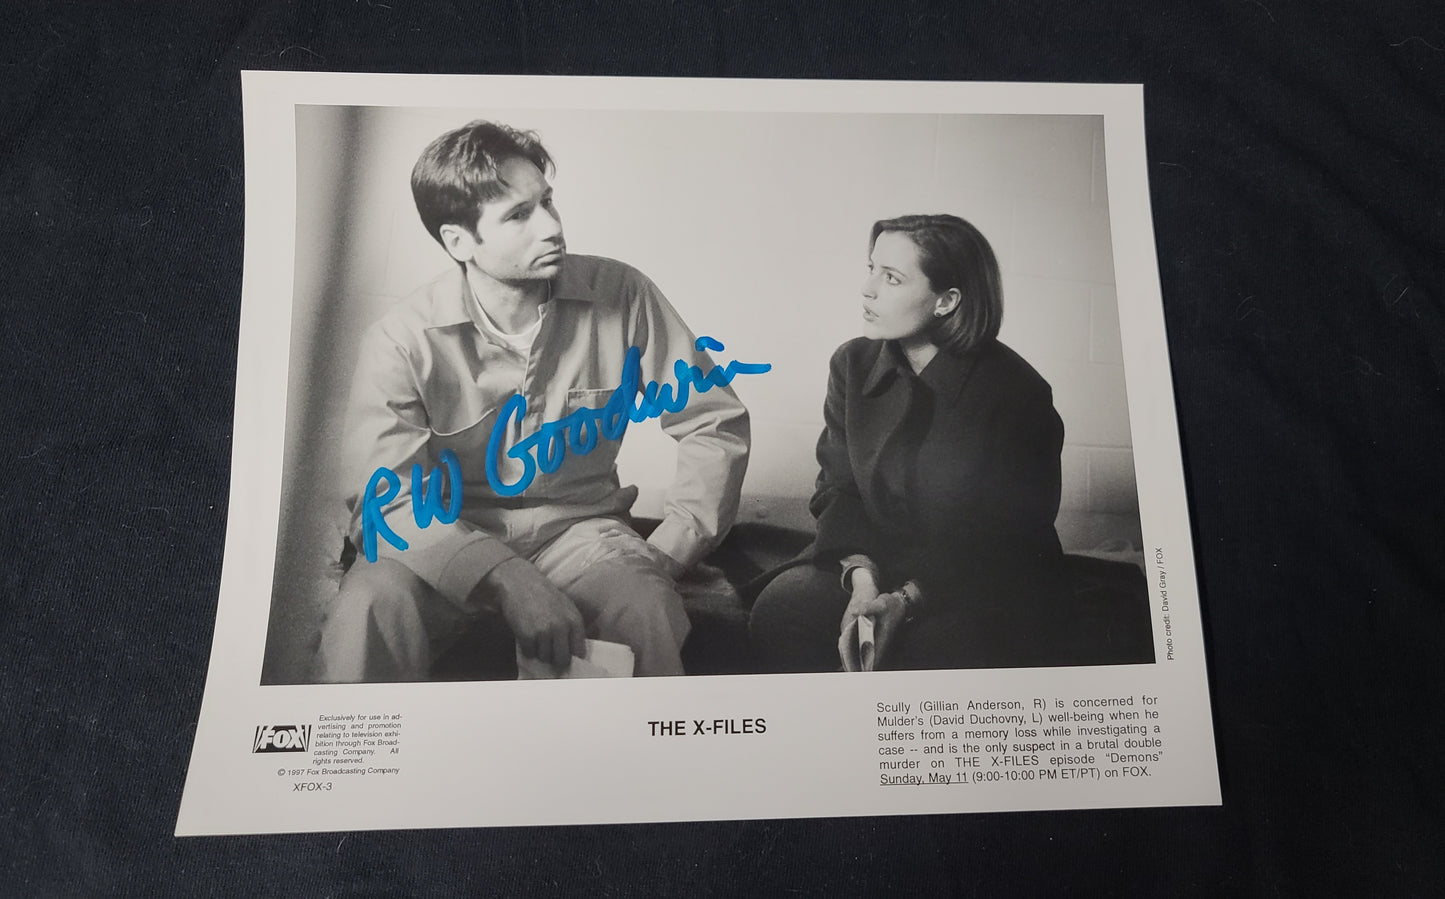 Press Photo autographed by R. W. Goodwin; Producer, Director and Writer for The X-Files. #7